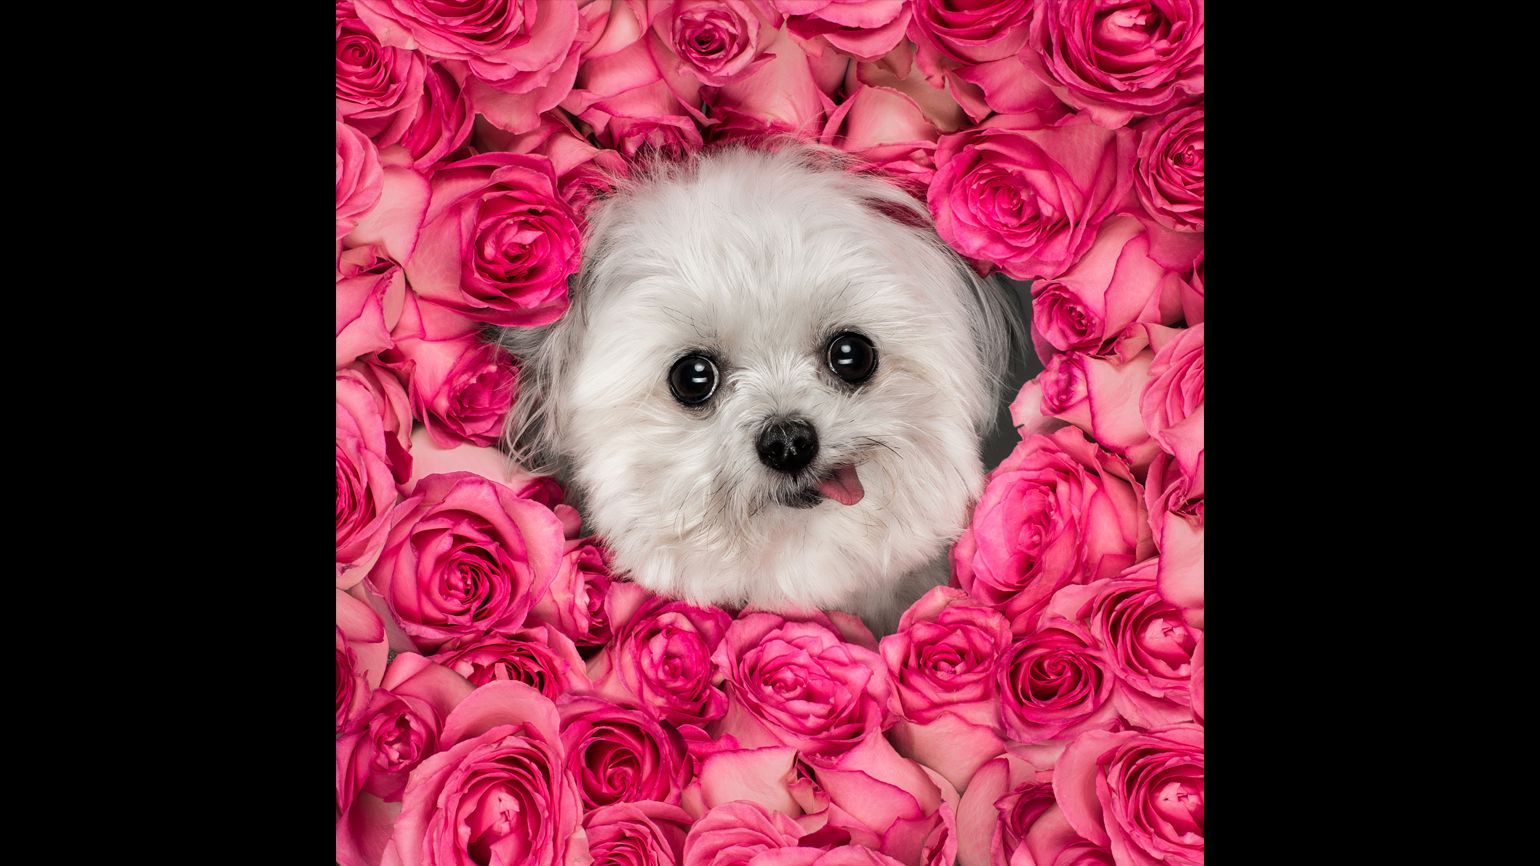 Norbert's face blooms in the middle of a collection of pink roses.